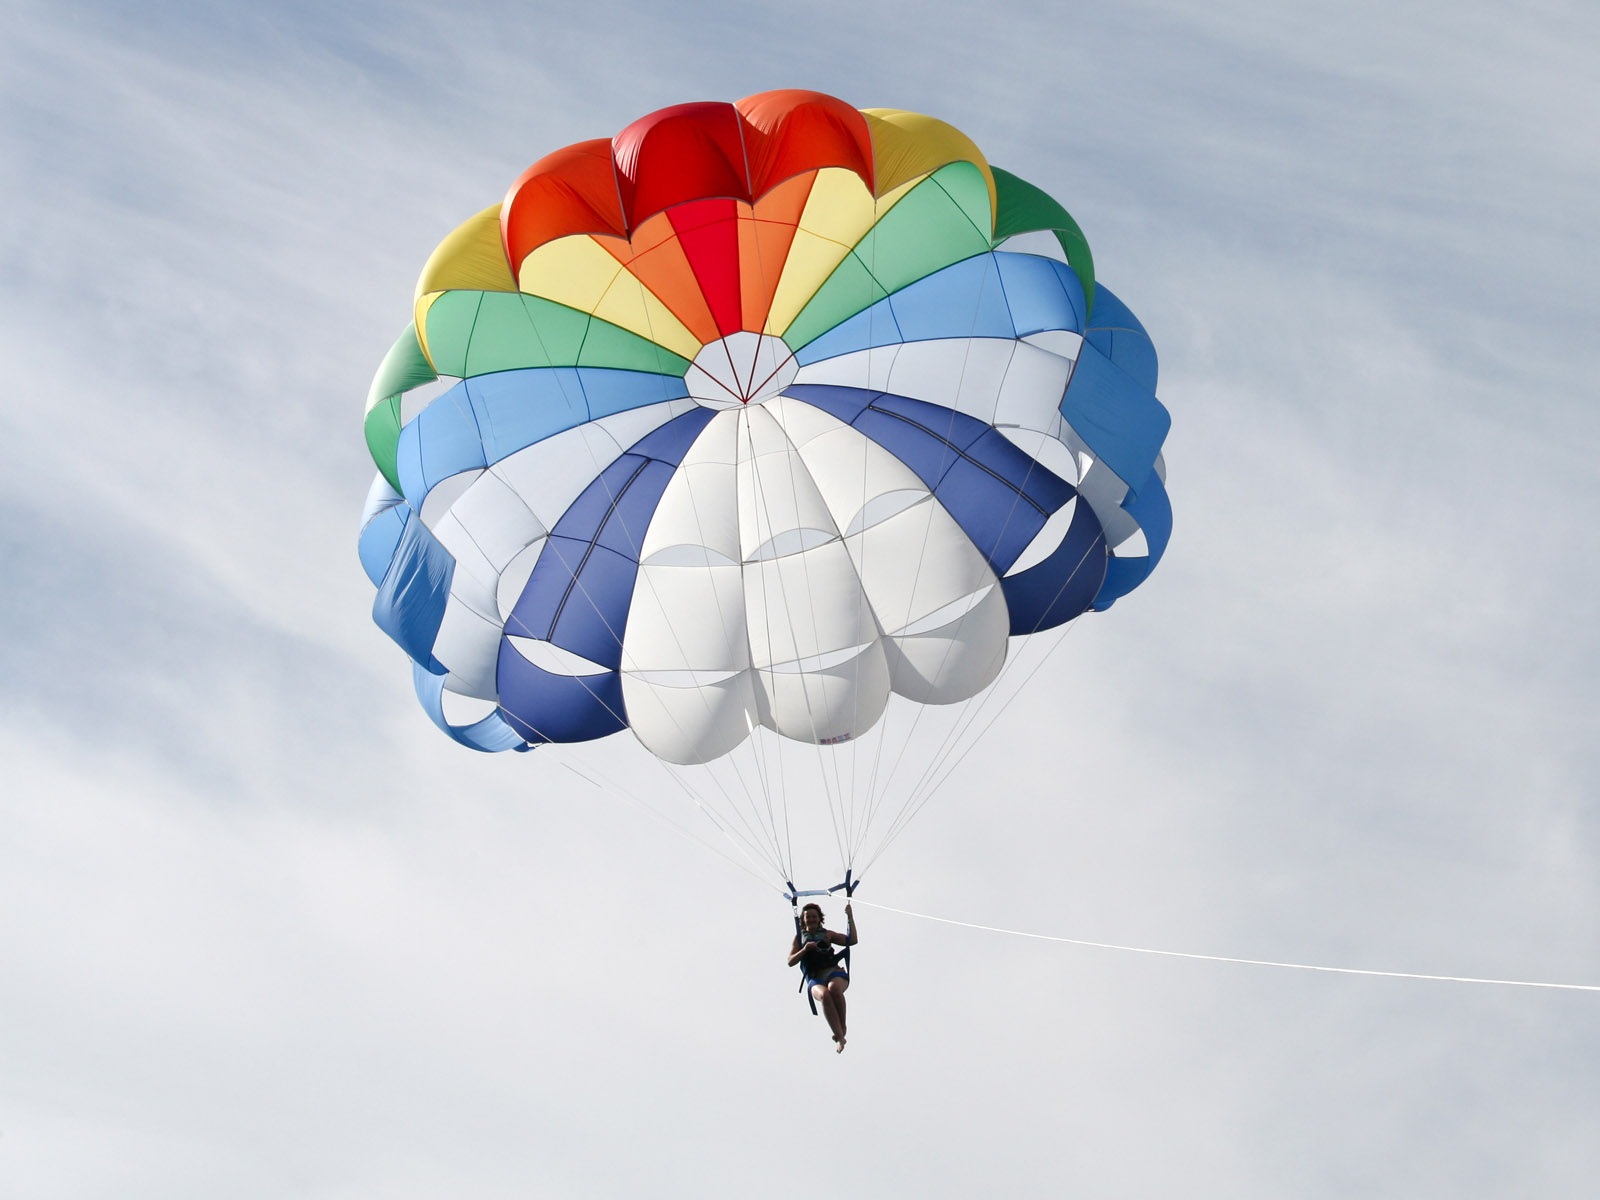 Awesome Parachute HD Wallpapers - B.SCB Wallpapers